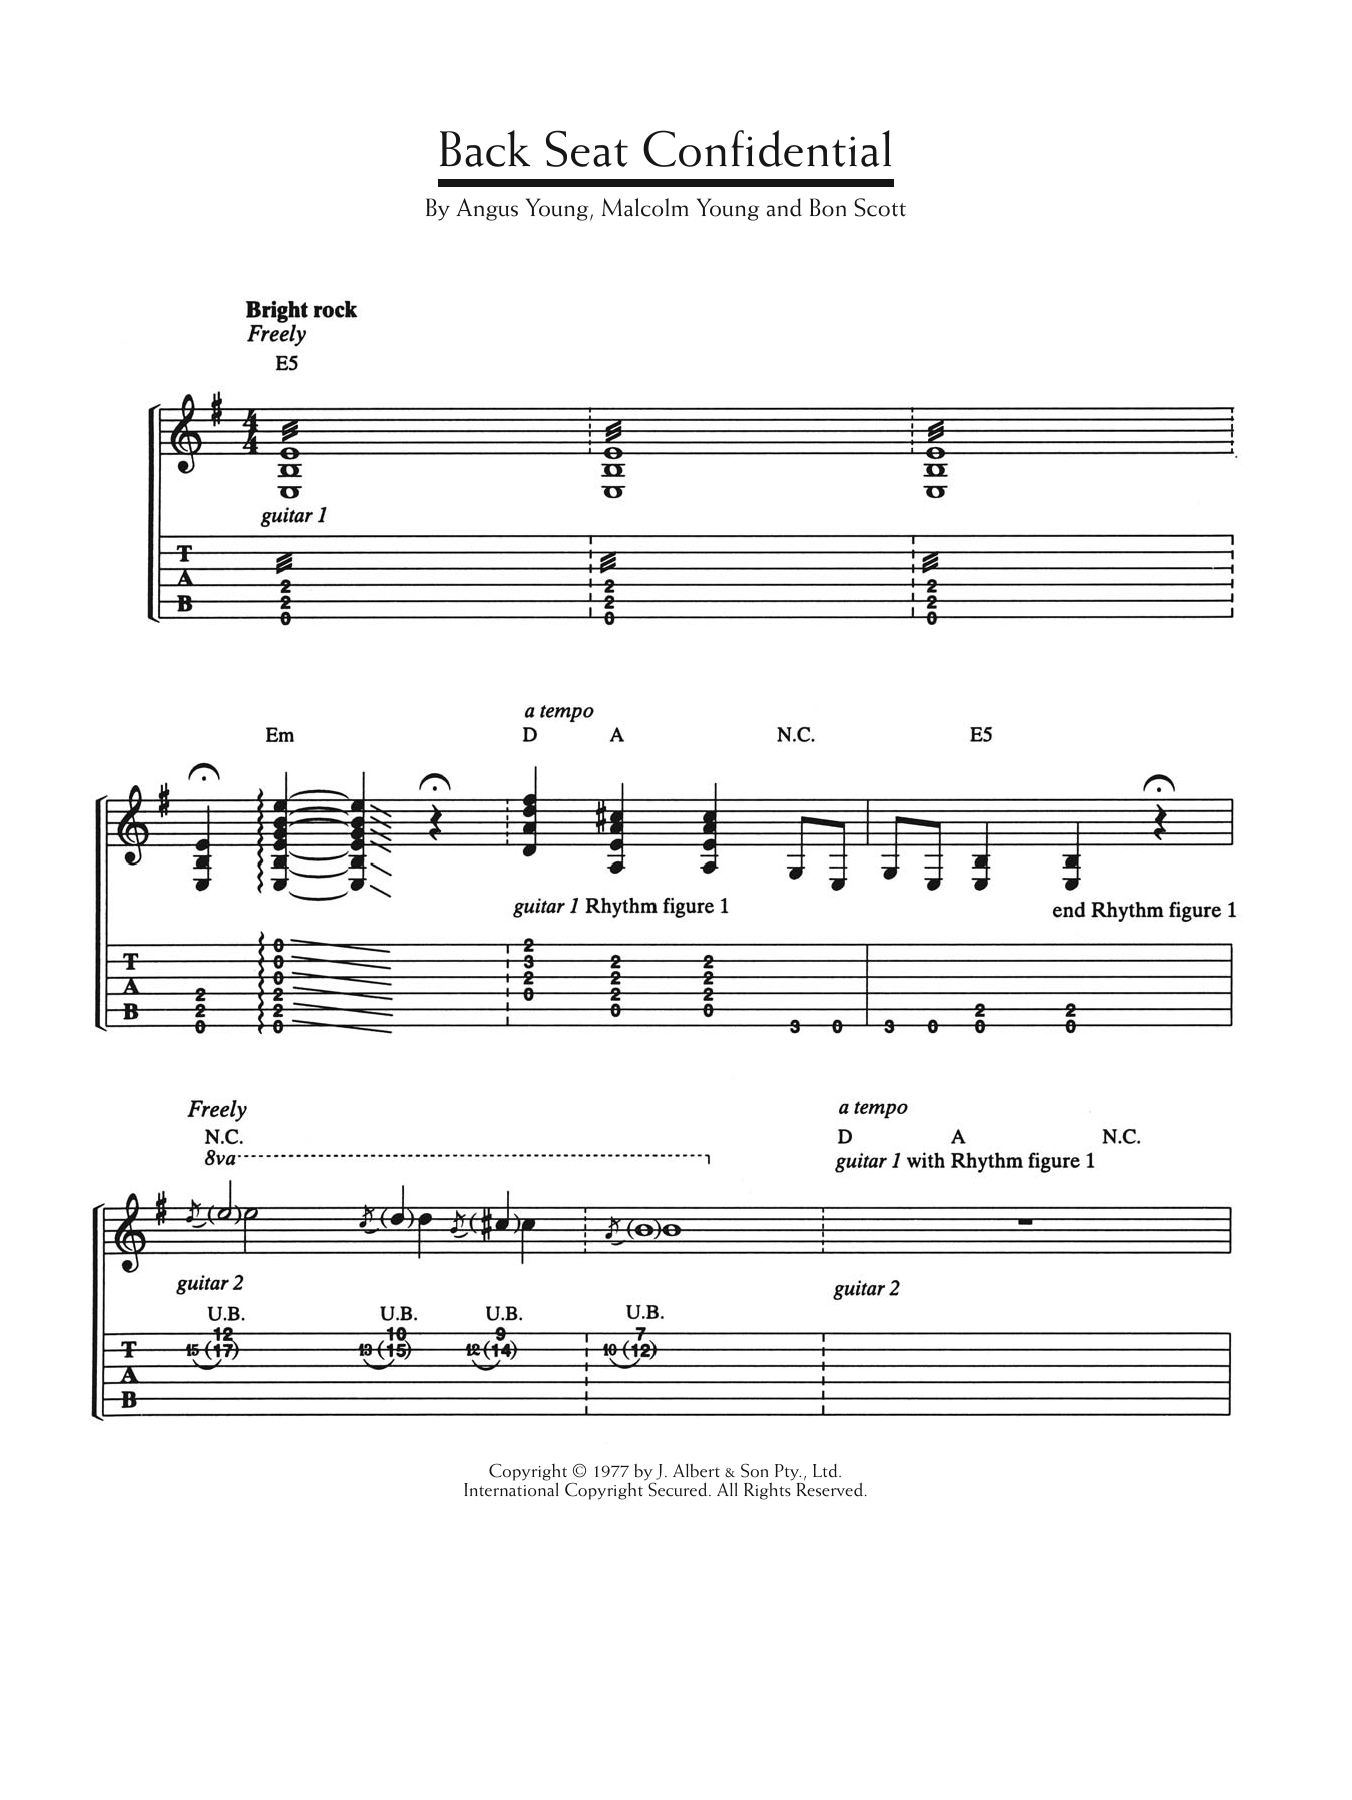 Download AC/DC Back Seat Confidential Sheet Music